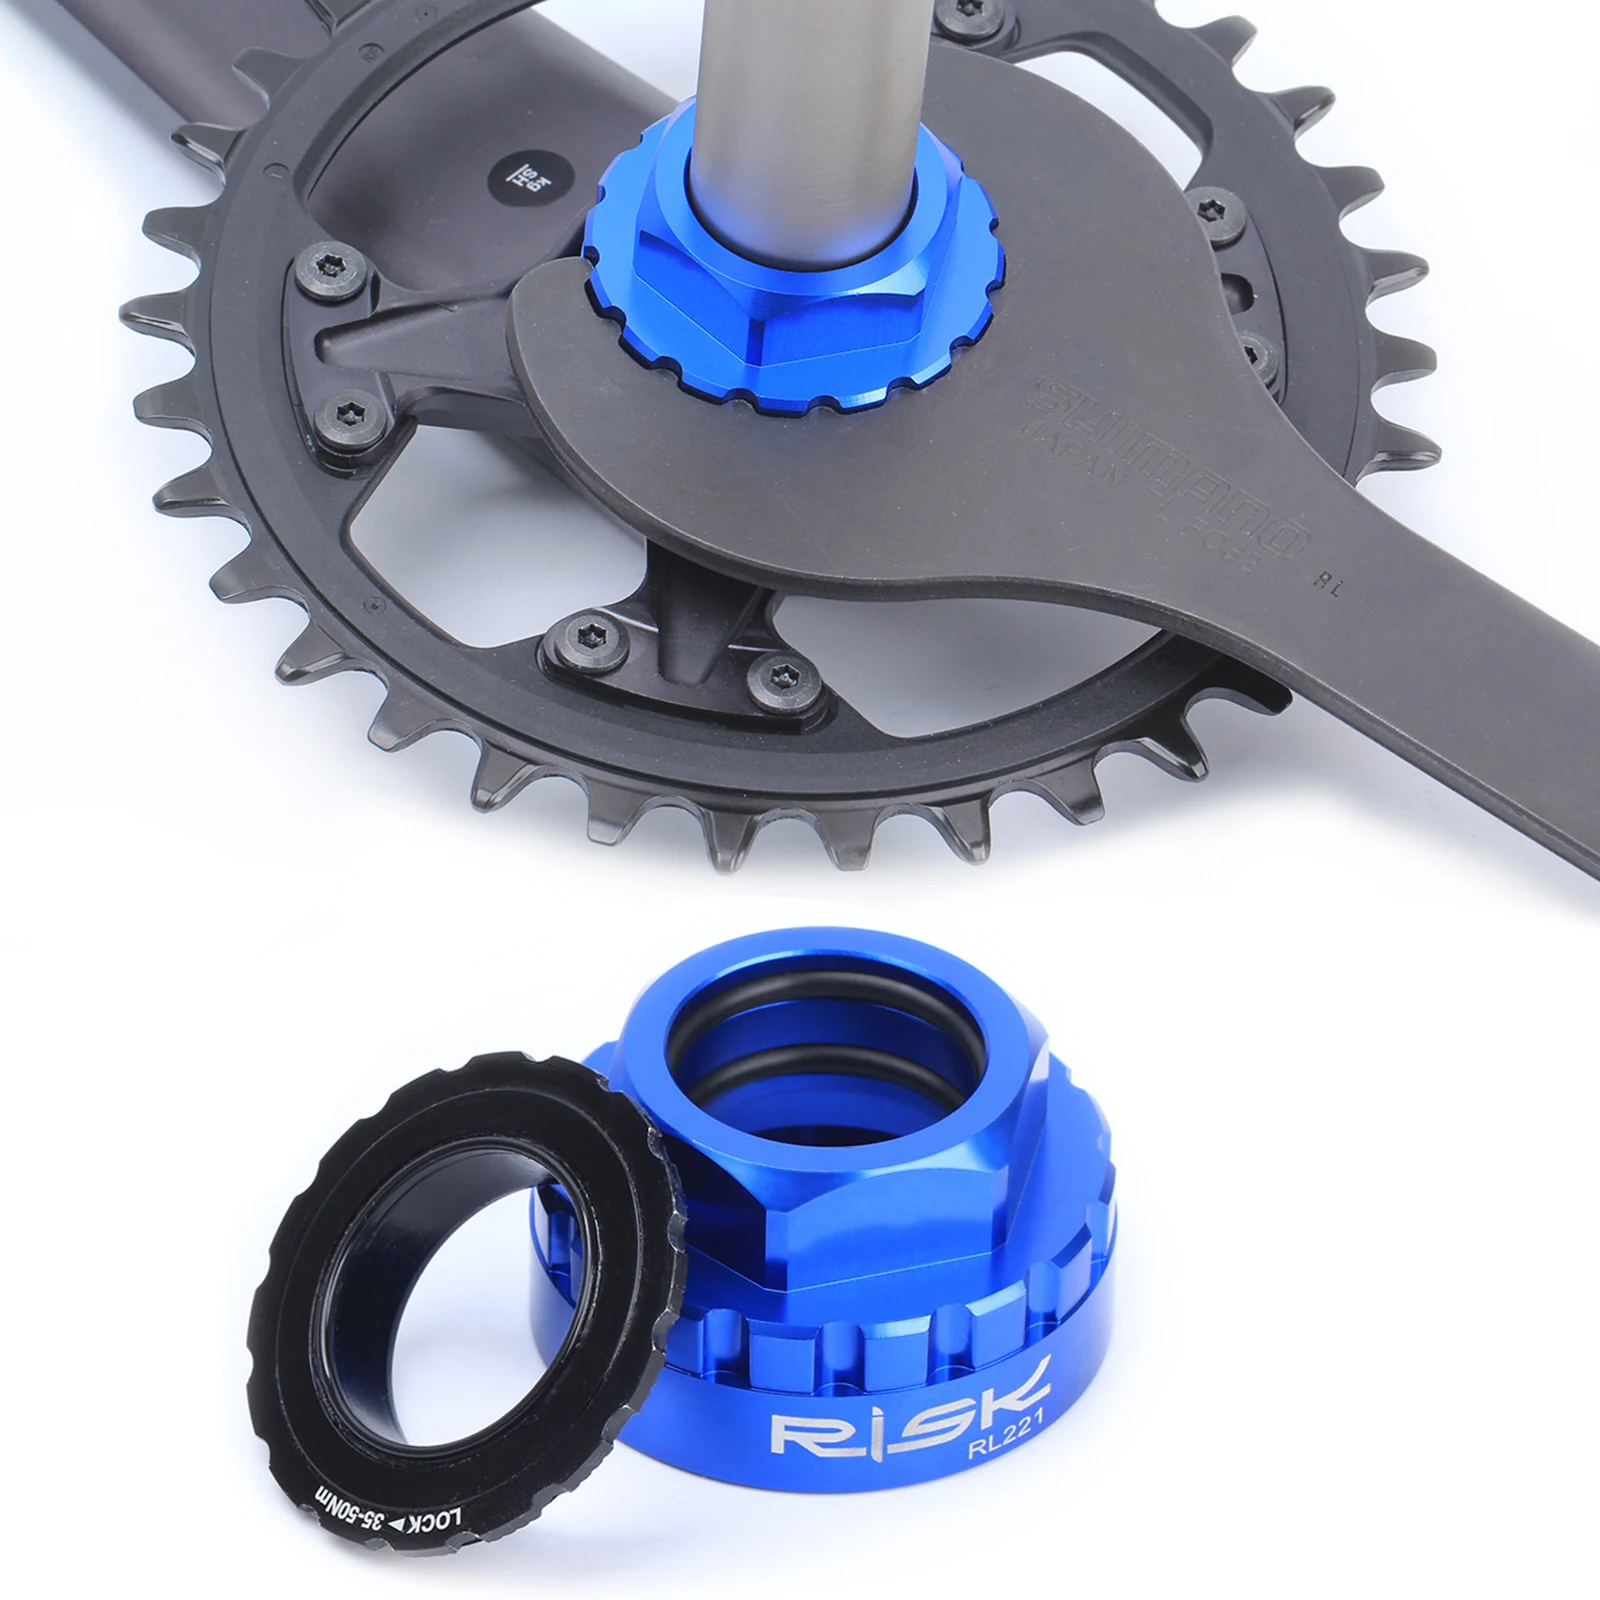 12Speed Chainring Adapter Rotor Lockring Removal Tool Cycle for Shimano